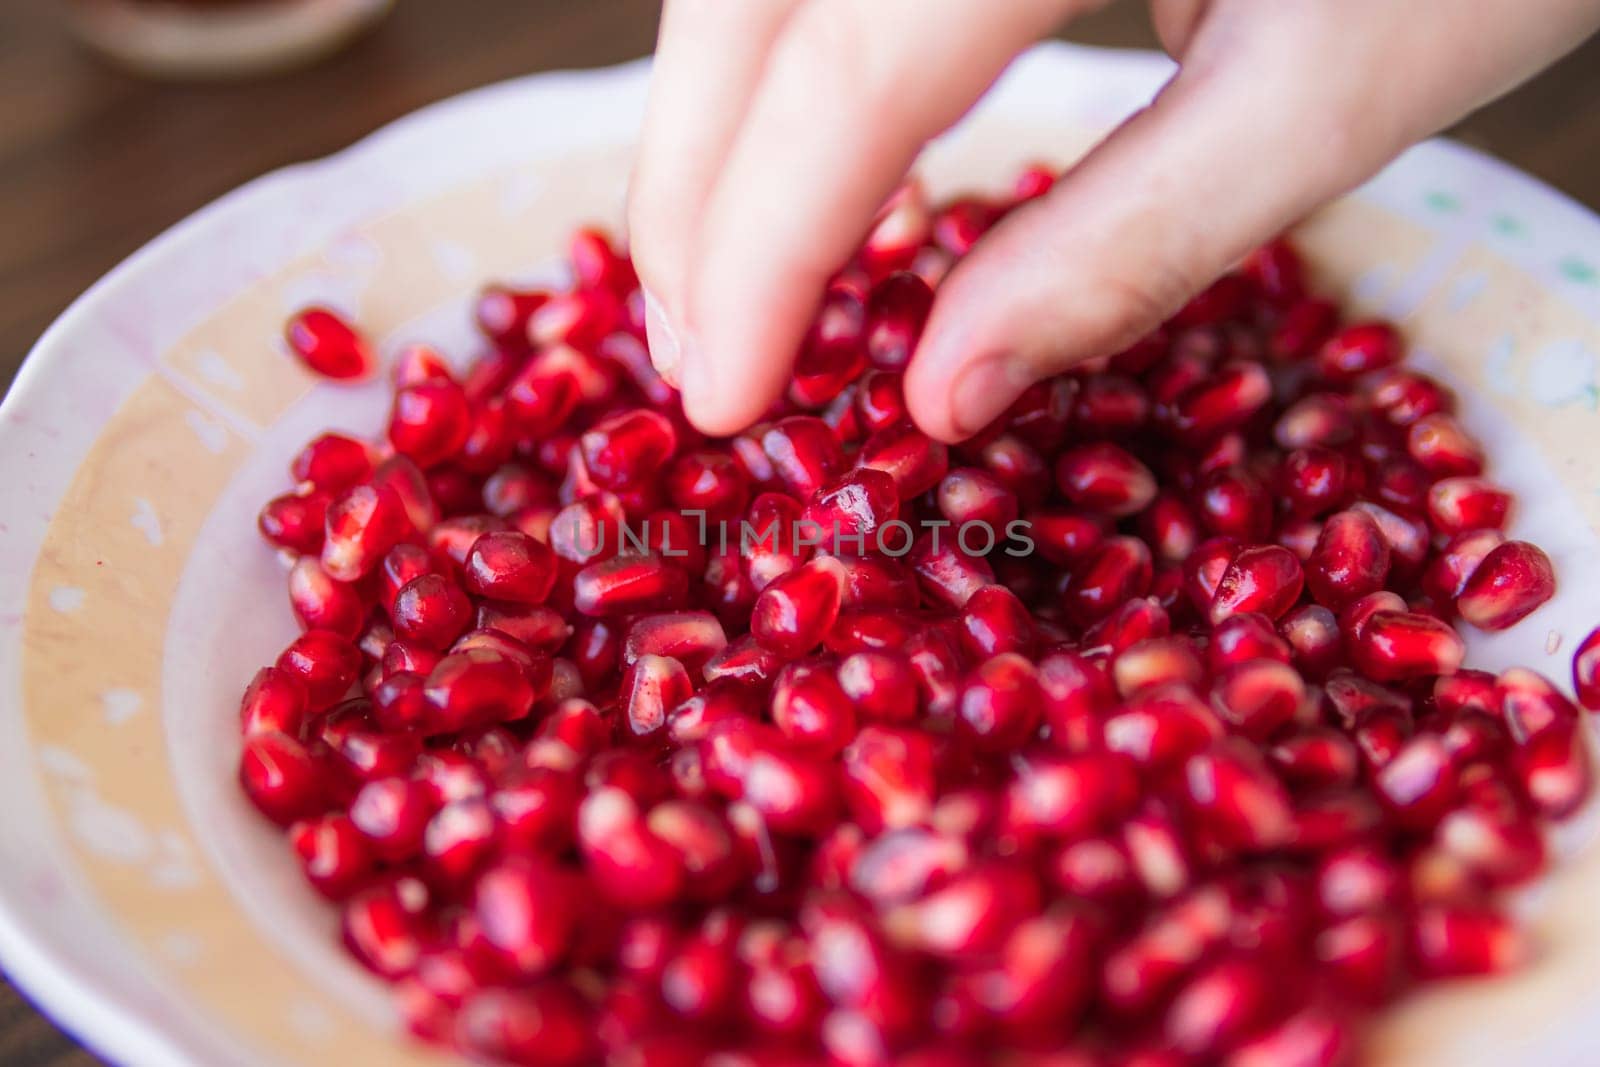 child's hand takes a red pomegranate from a plate close-up by PopOff